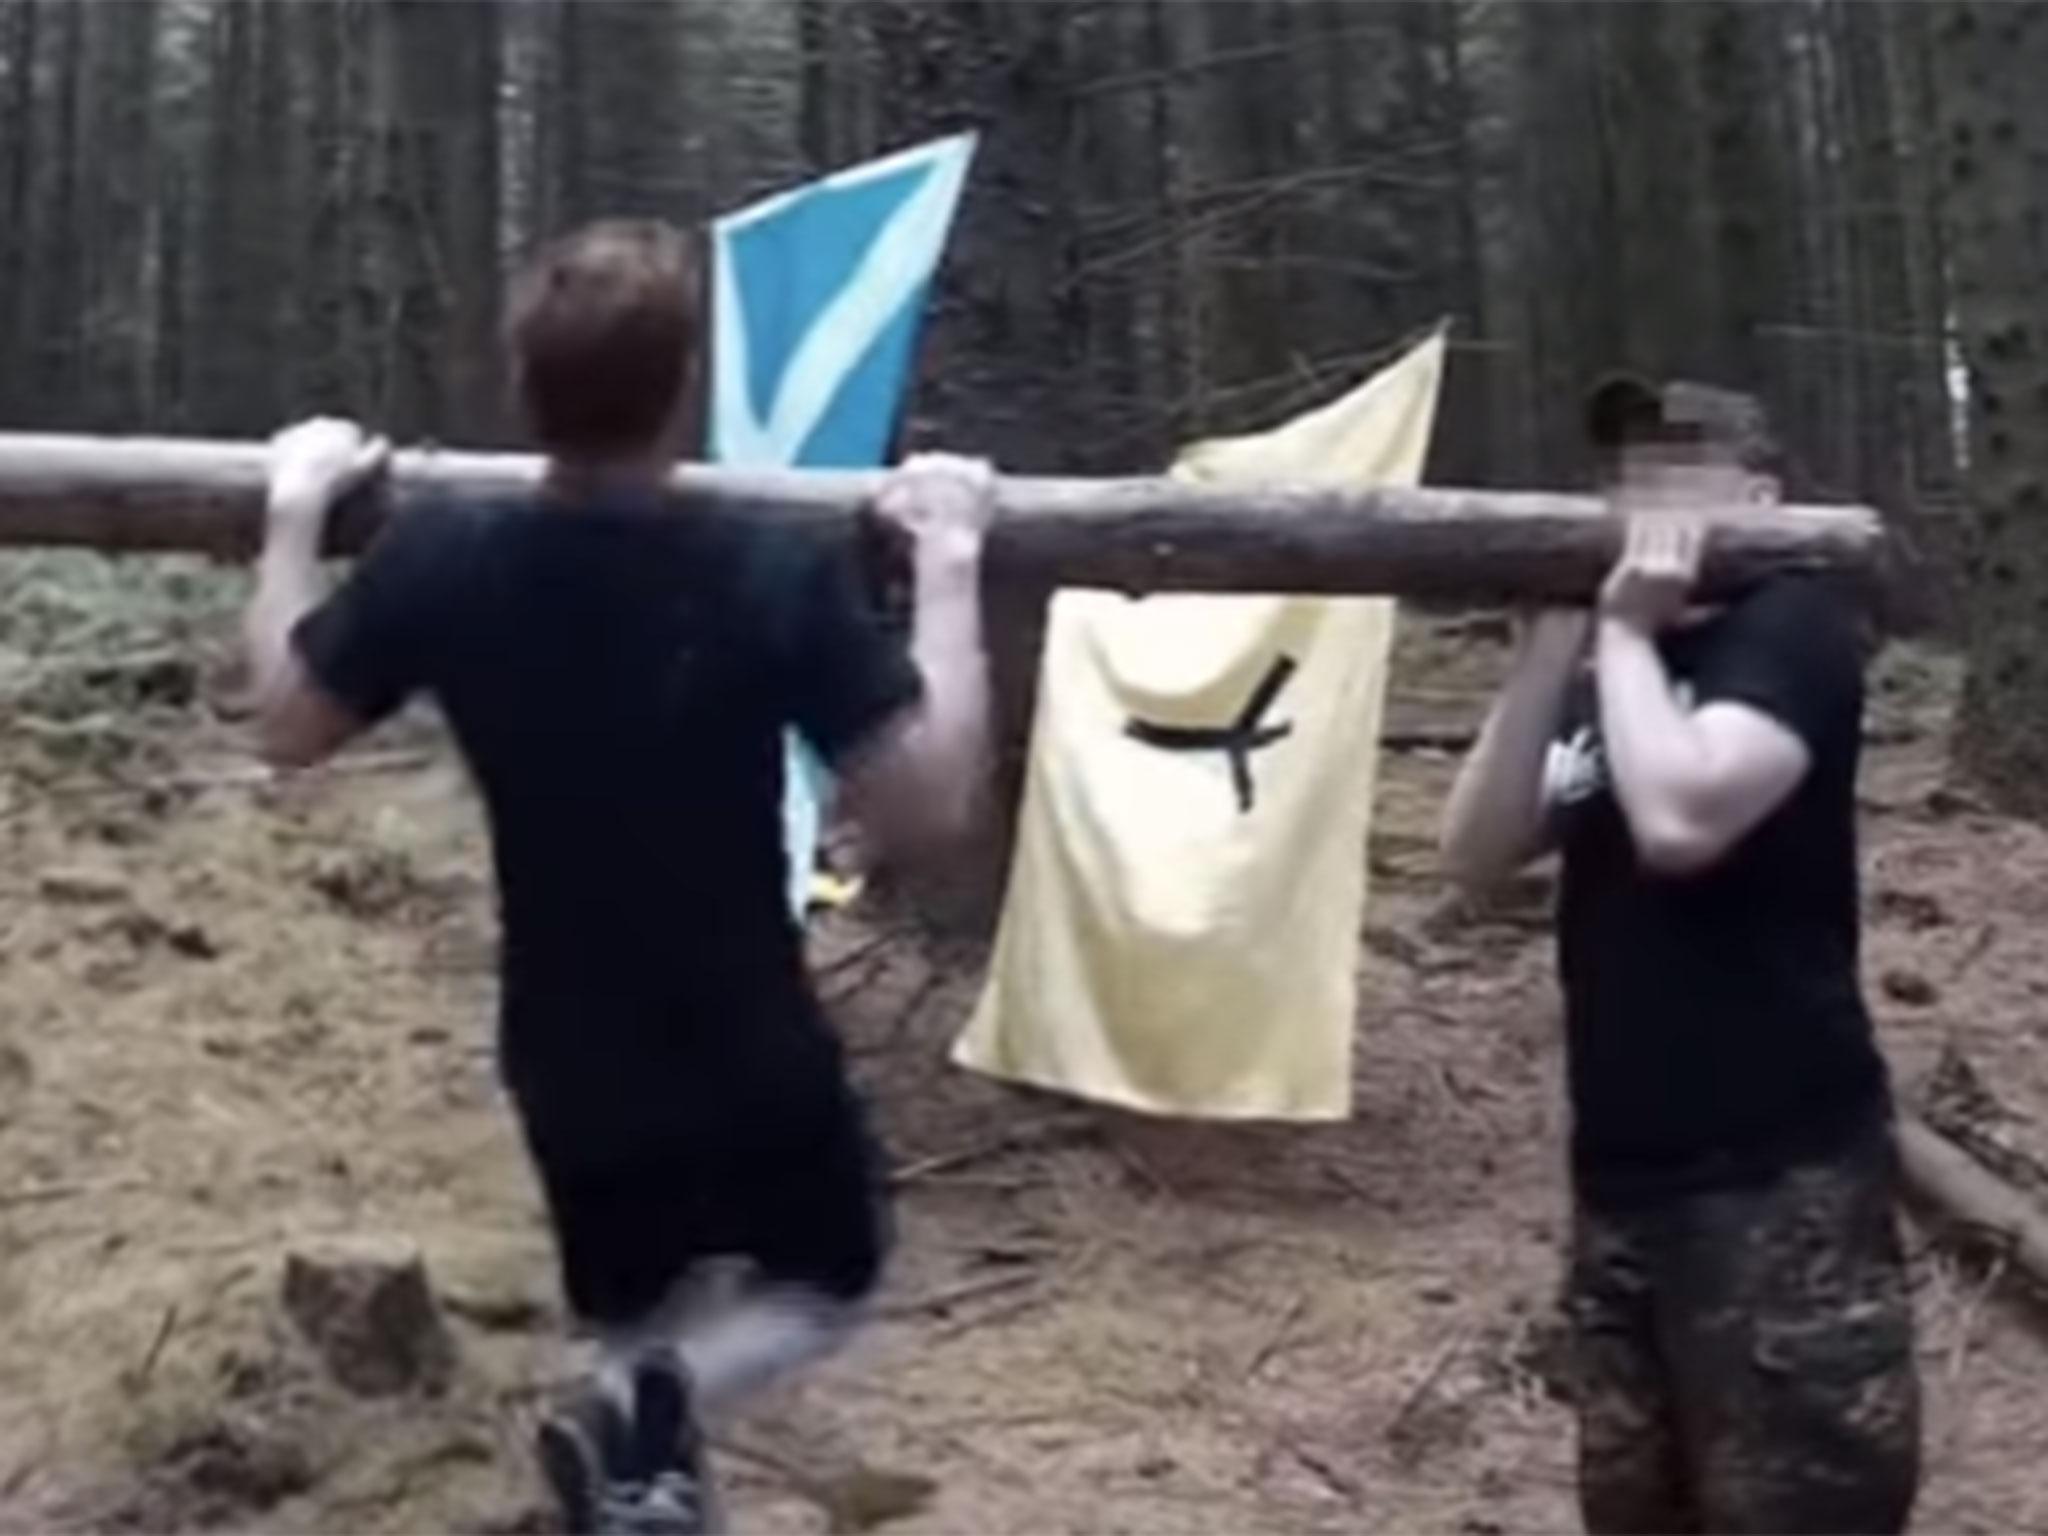 Members of Scottish Dawn undergoing combat training, shown in a video called Braveheart Fight Club uploaded in September 2017